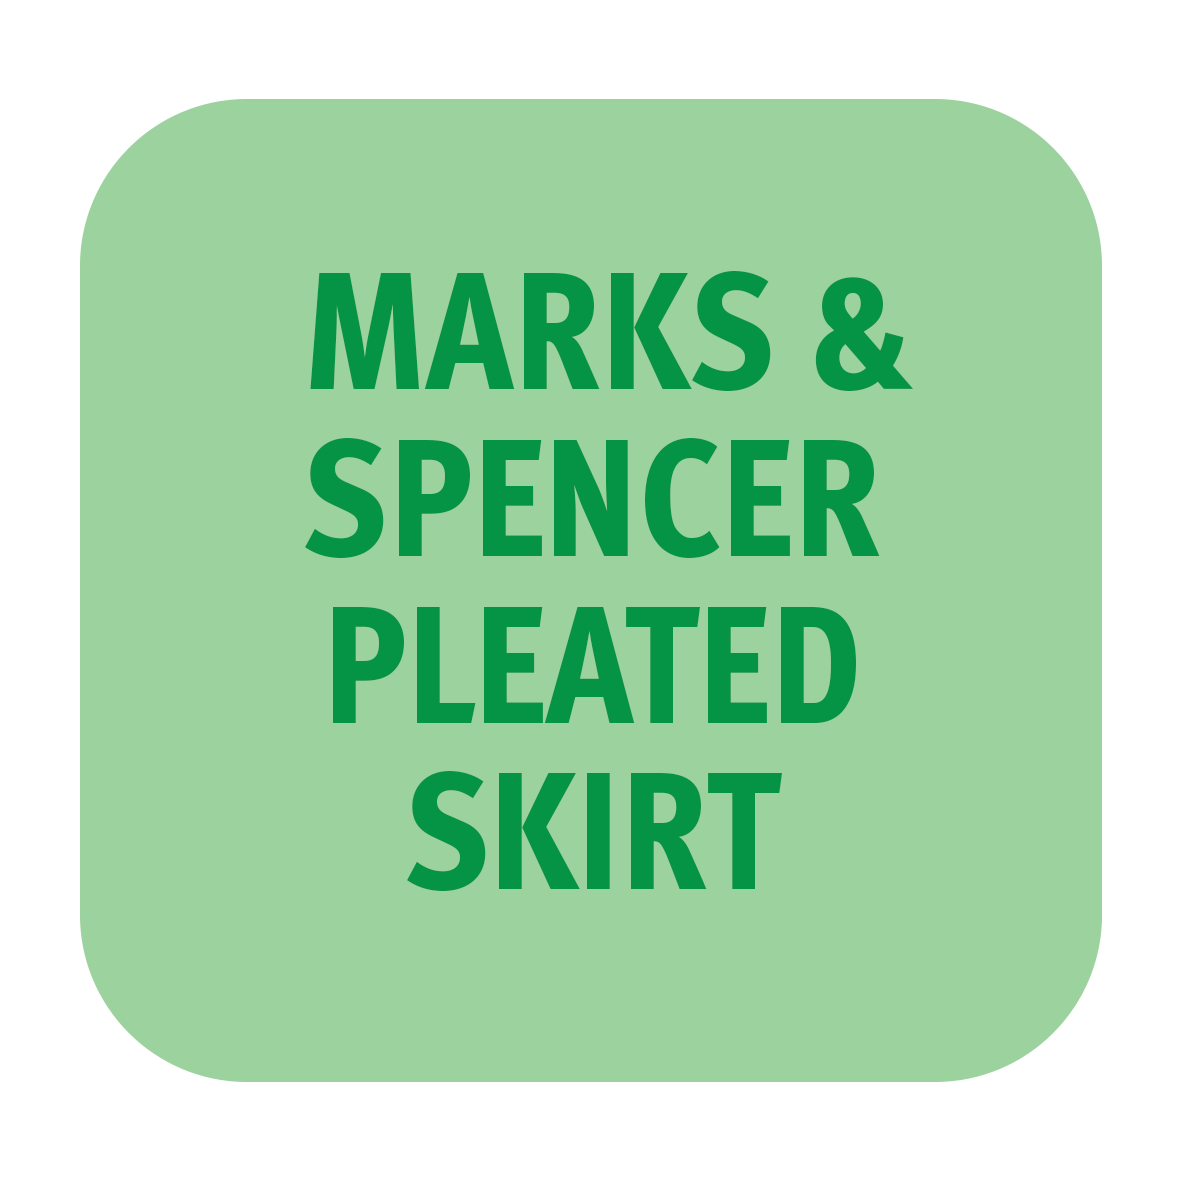 M&S SKIRT.png